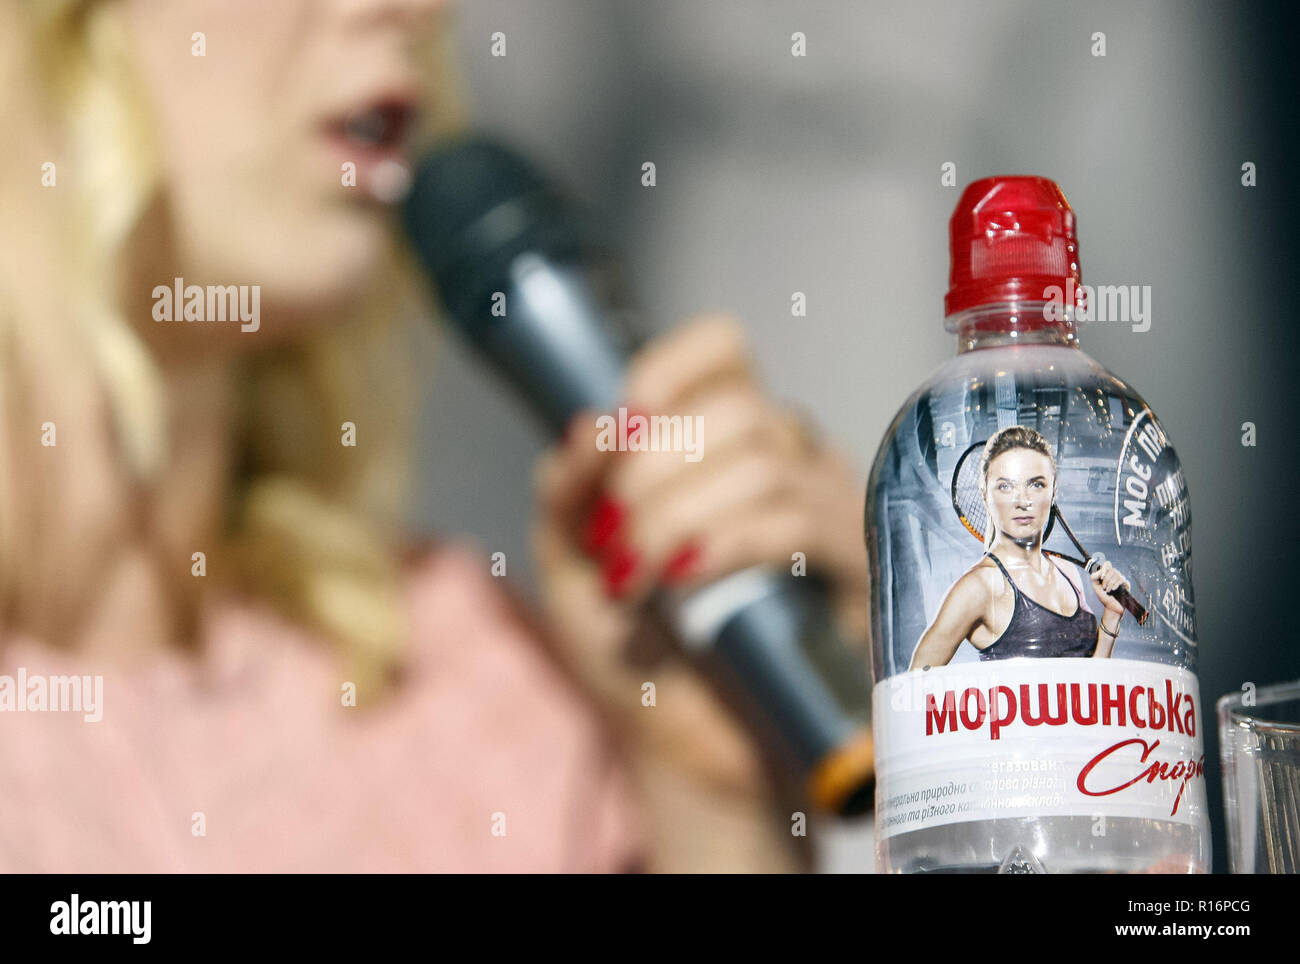 Kiev, Kiev, Ukraine. 9th Nov, 2018. A bottle of mineral water with an image of Ukrainian tennis player Elina Svitolina seen on a table during an autograph session in Kiev.Elina Svitolina of Ukraine winning against Sloane Stephens of the USA and register the biggest win of her career when she rallied for a 2-1 (3-6, 6-2, 6-2), during their singles final match of the BNP Paribas WTA Finals 2018 held in Singapore on 28 October 2018. Credit: Pavlo Gonchar/SOPA Images/ZUMA Wire/Alamy Live News Stock Photo